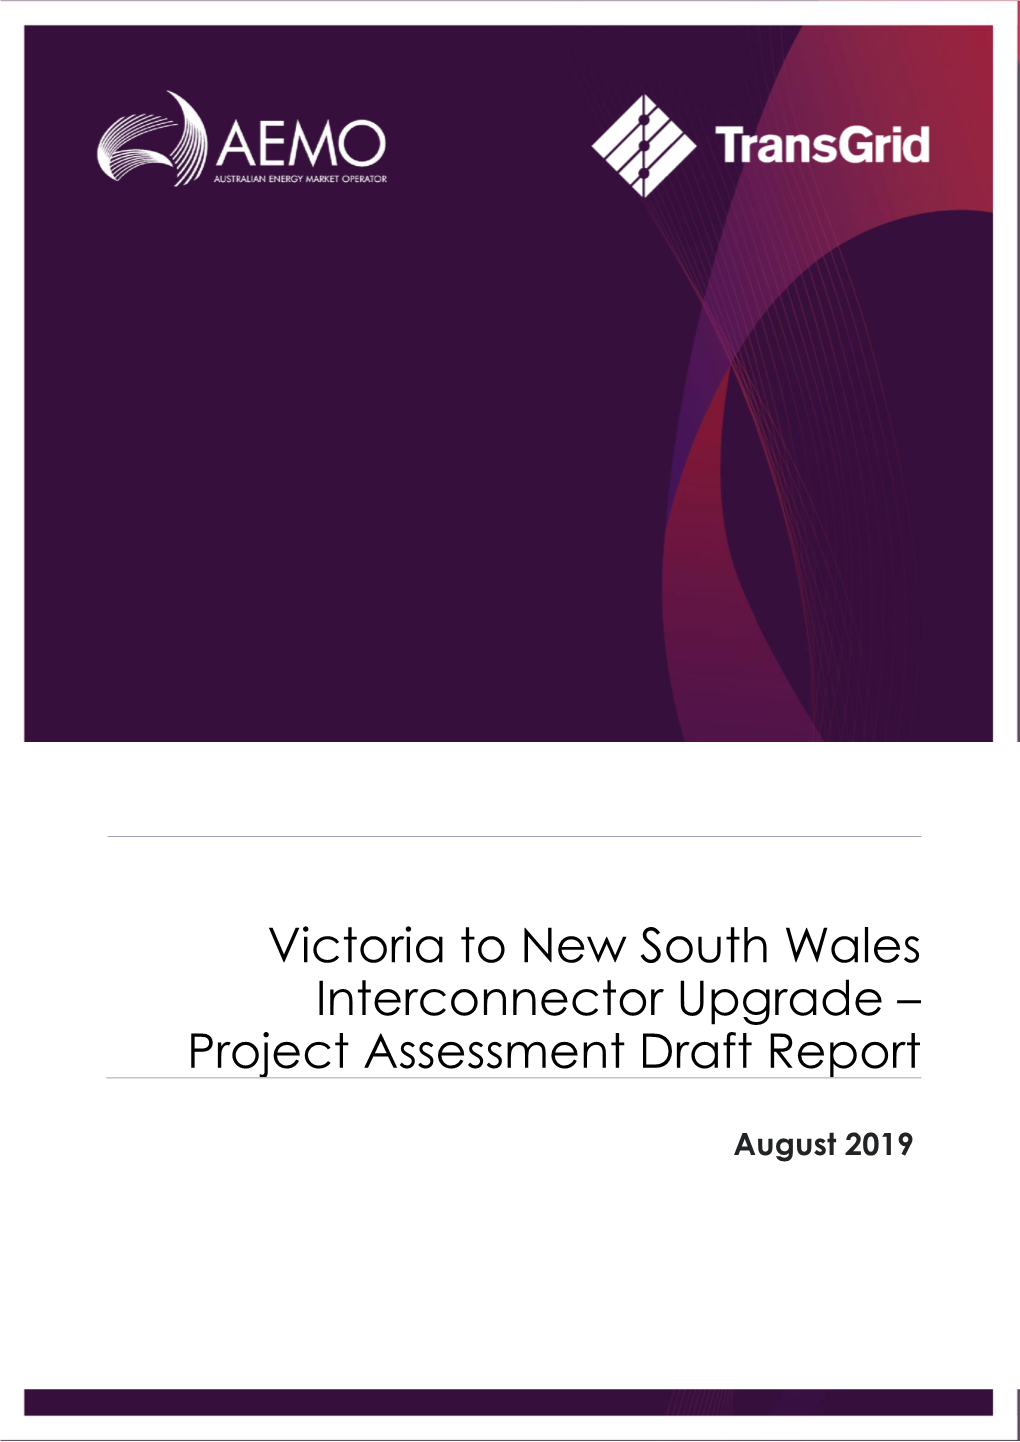 Victoria to New South Wales Interconnector Upgrade – Project Assessment Draft Report